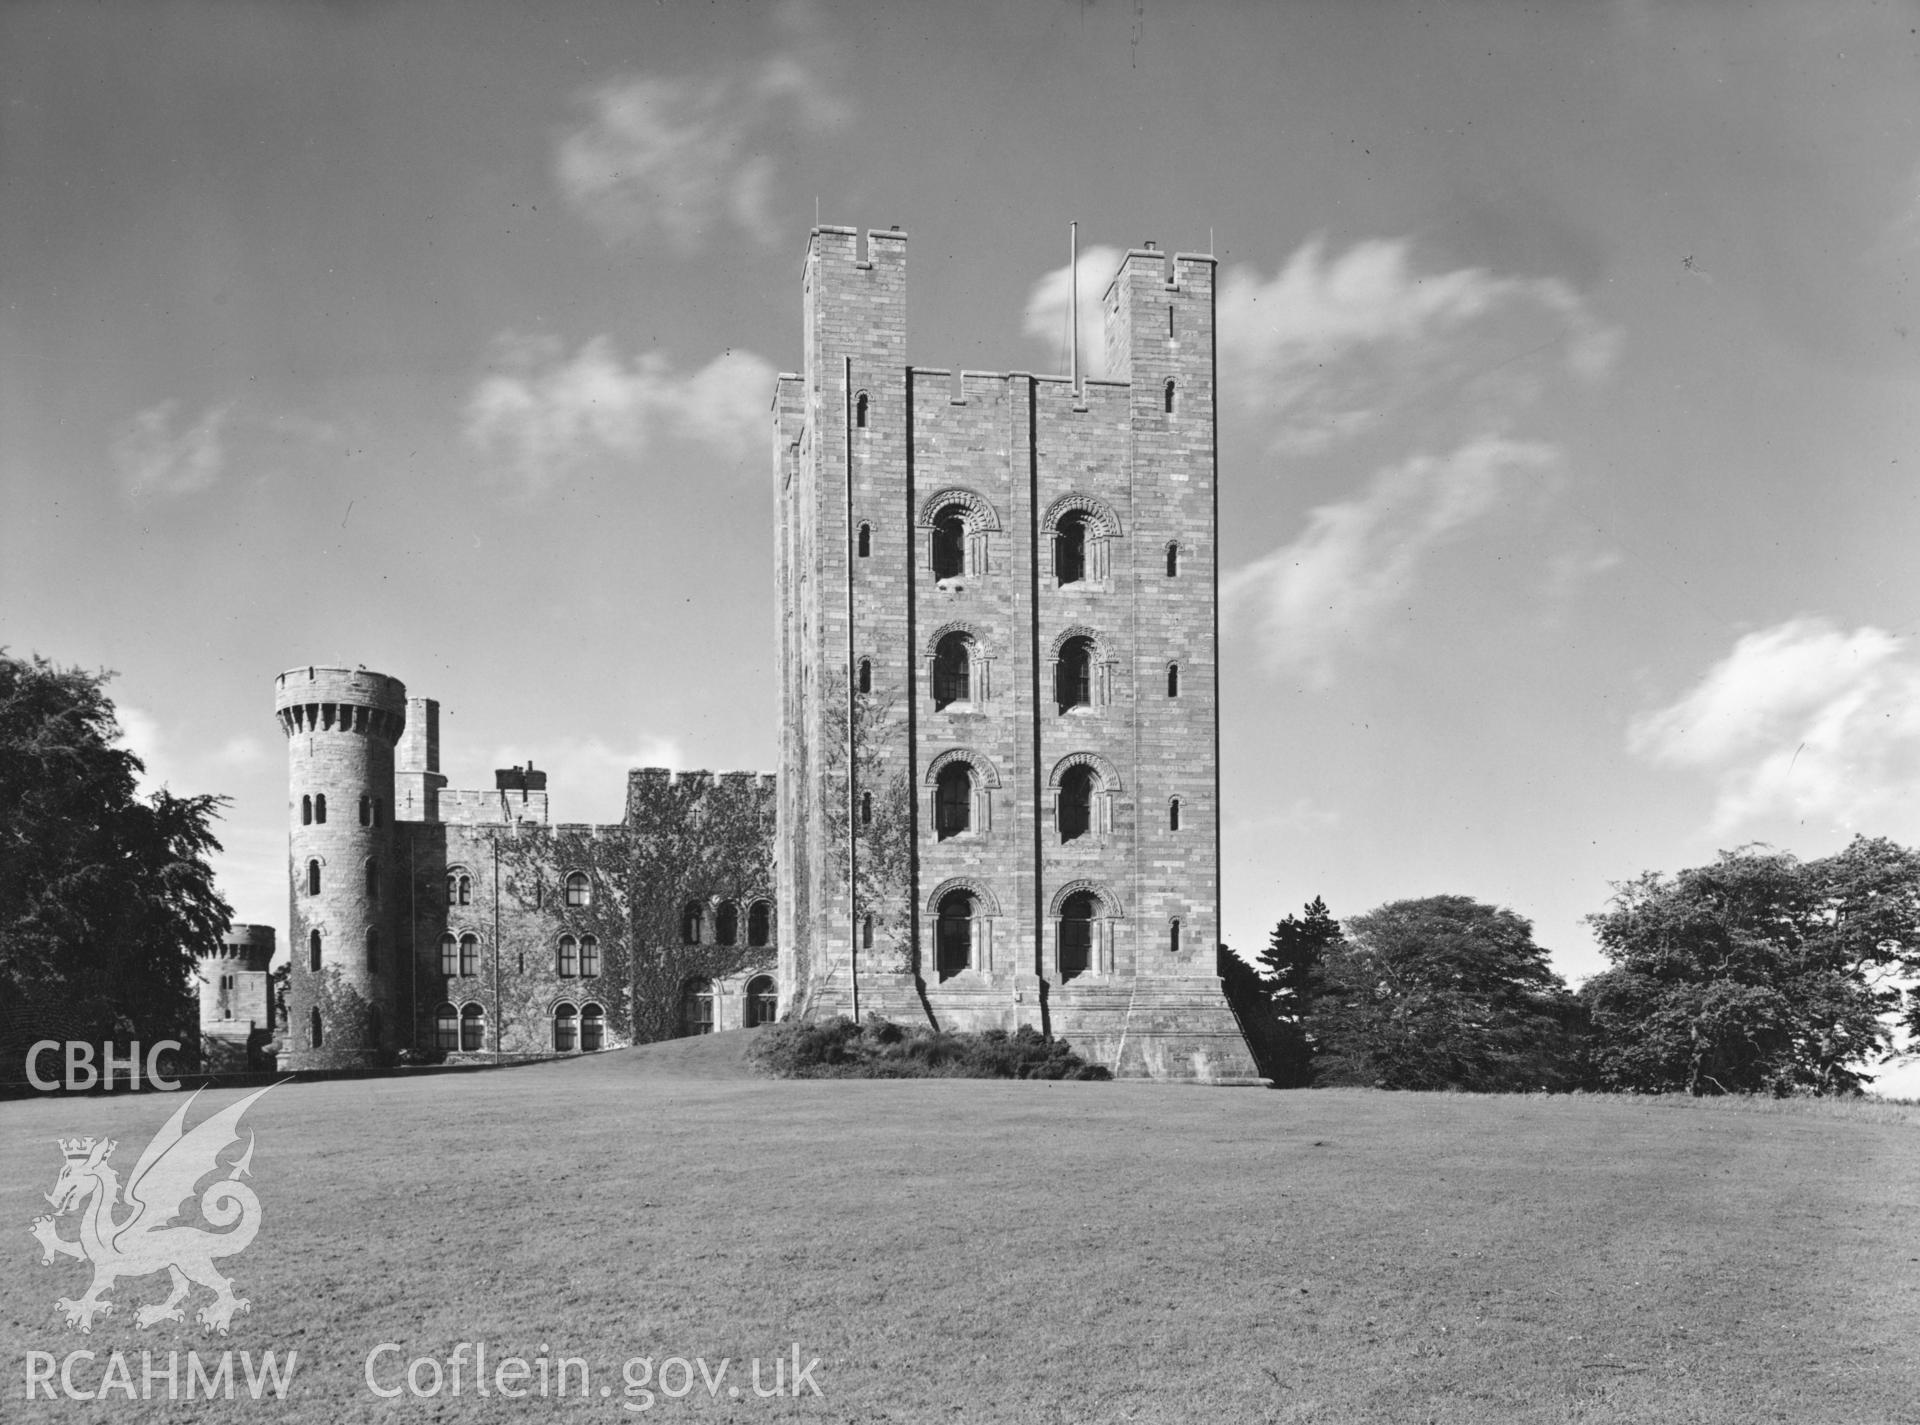 Digital copy of a 1954 photo by A.F. Kersting showing Penrhyn Castle from the south.